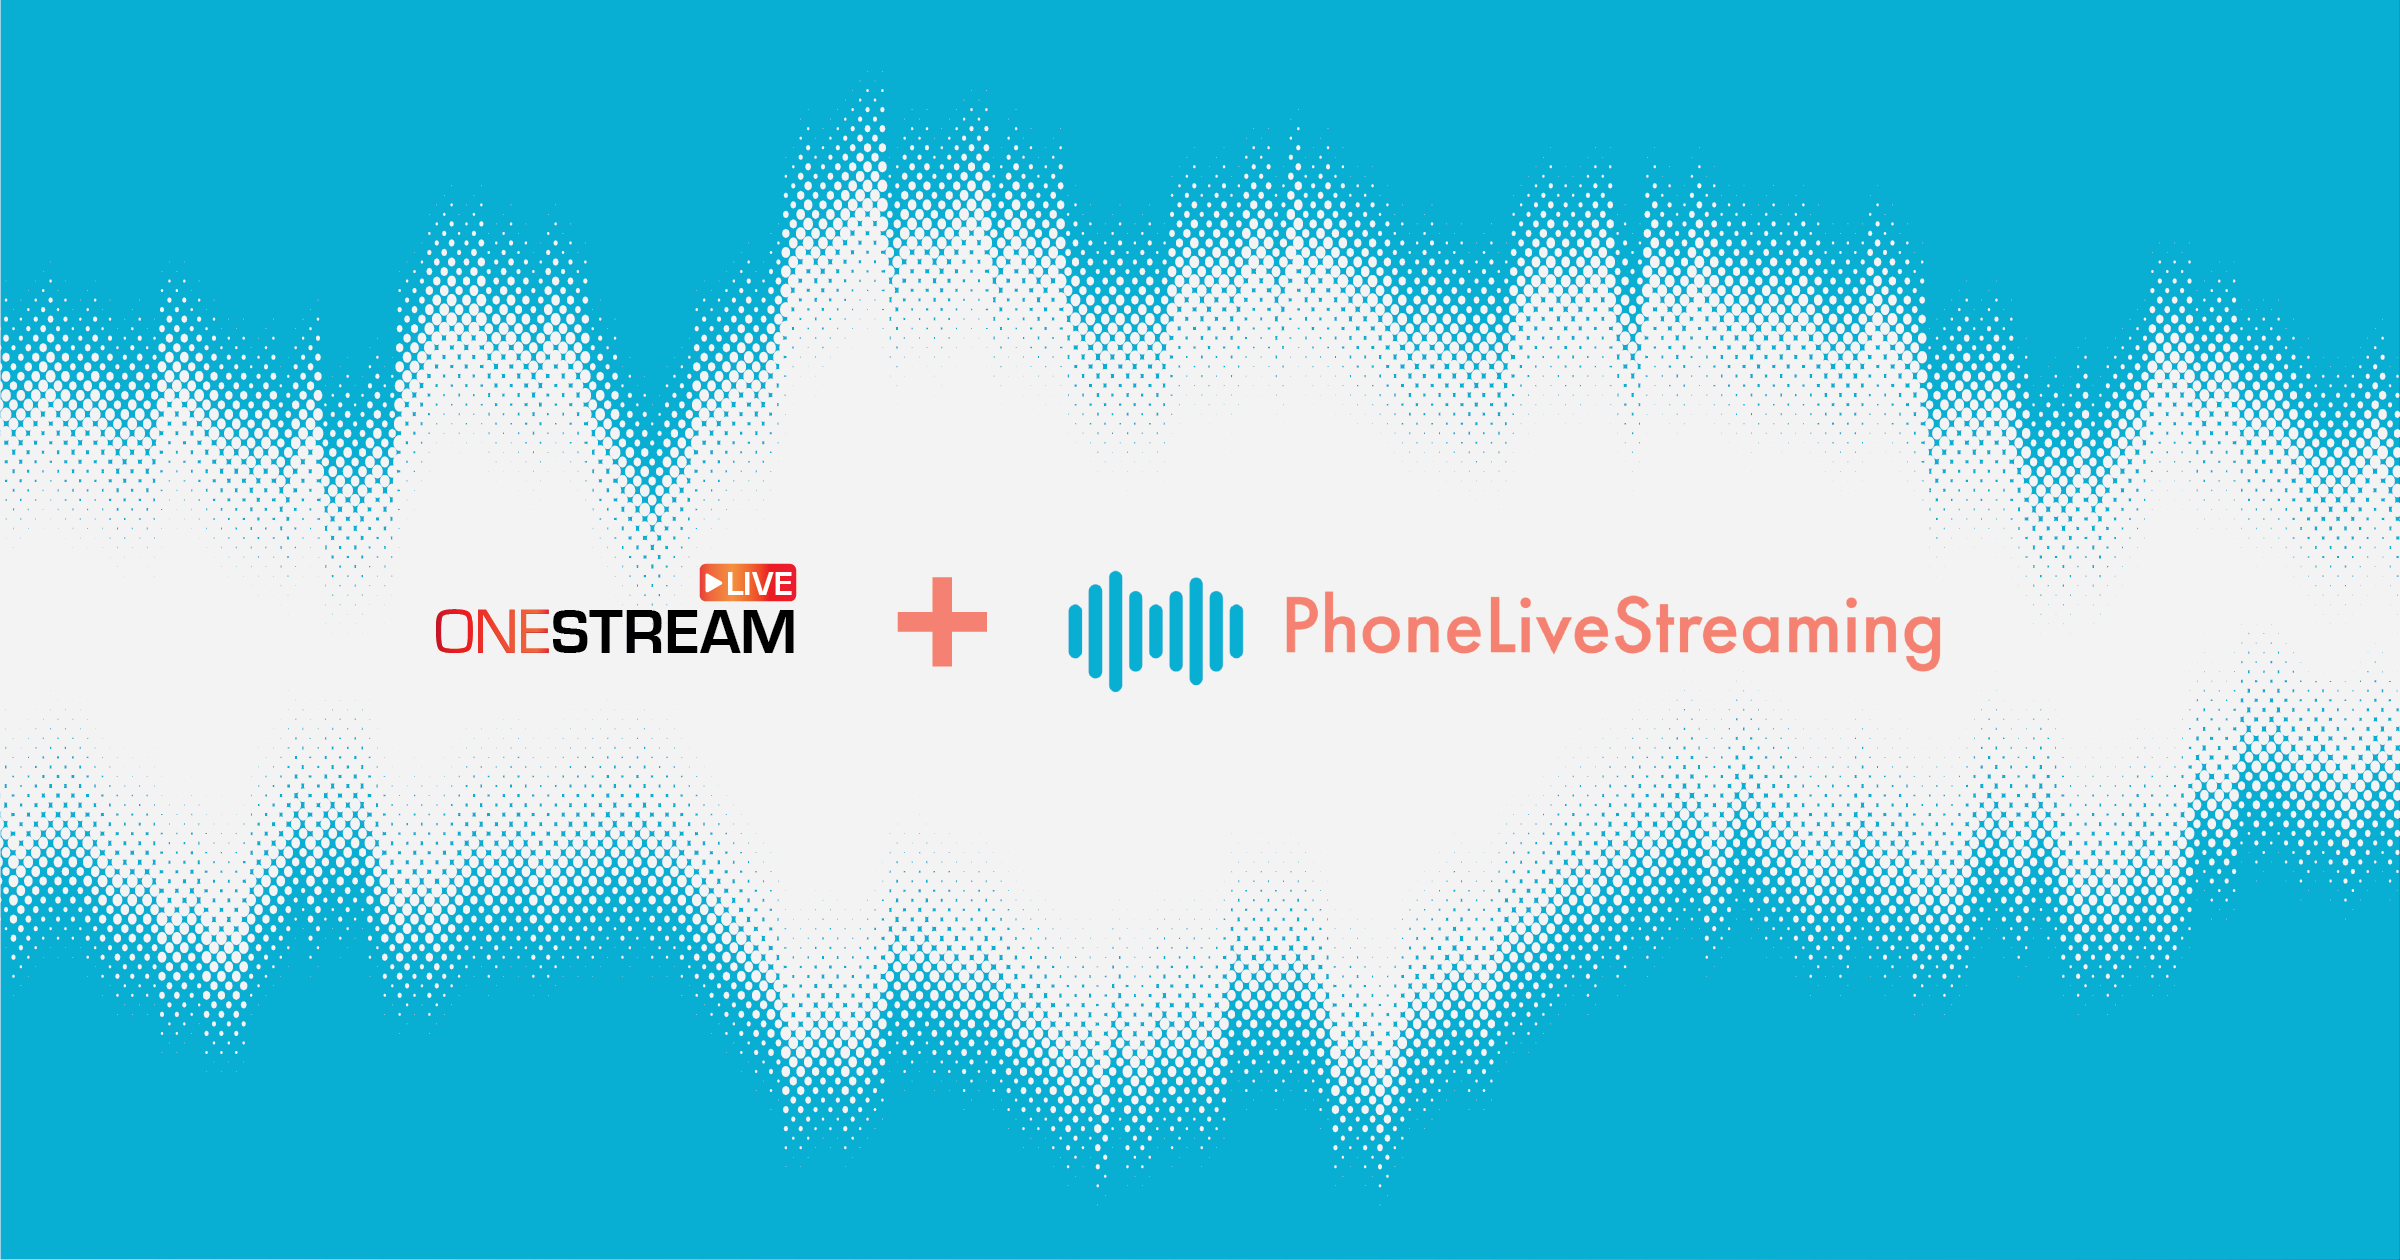 News Update: PhoneLiveStreaming Now Integrated with OneStream Live